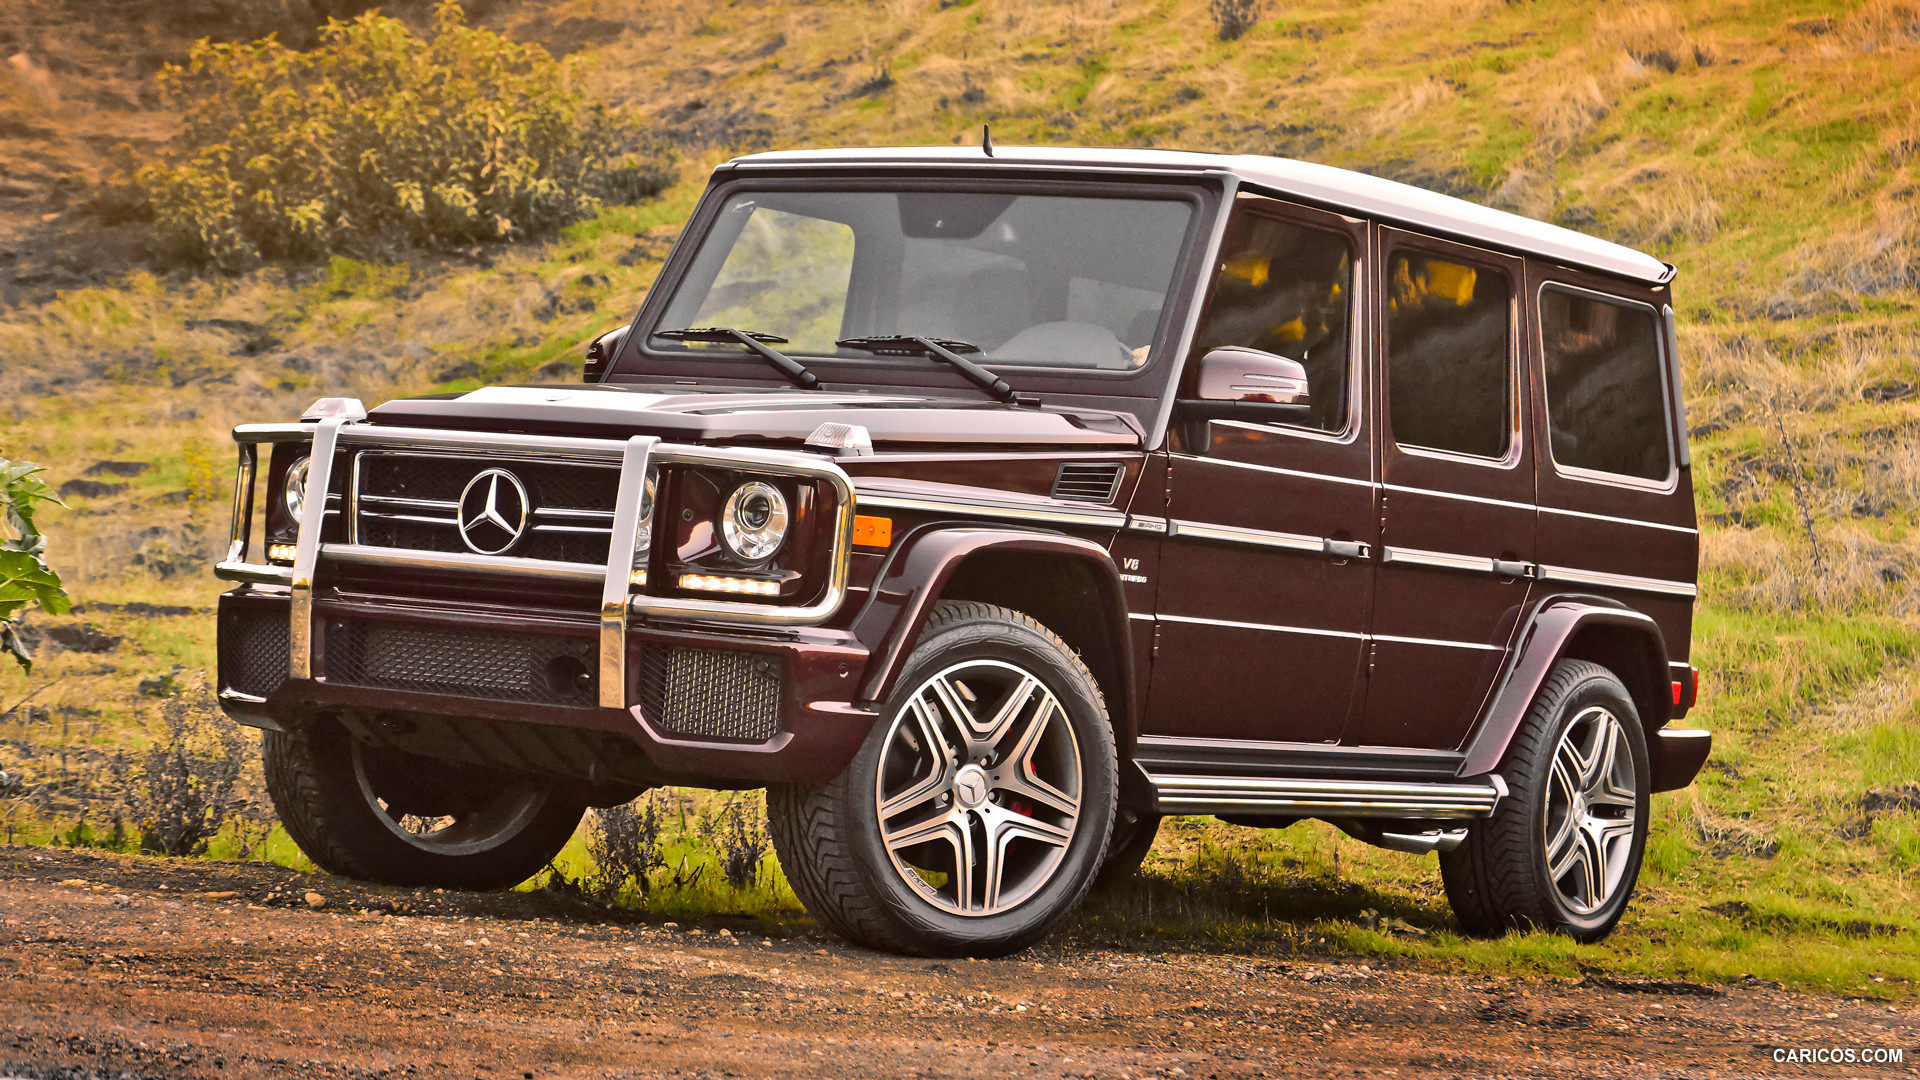 Mercedes-Benz G63 AMG US-Version (2013)  - Front, #52 of 83